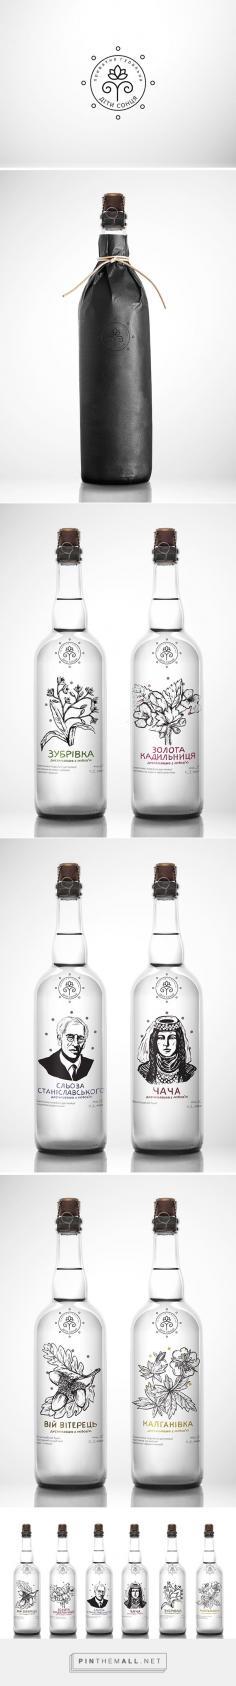 
                    
                        Moonshine packaging branding on Behance by Andreana Chunis curated by Packaging Diva PD. Love this illustrated bottle design for Moonshine : )
                    
                